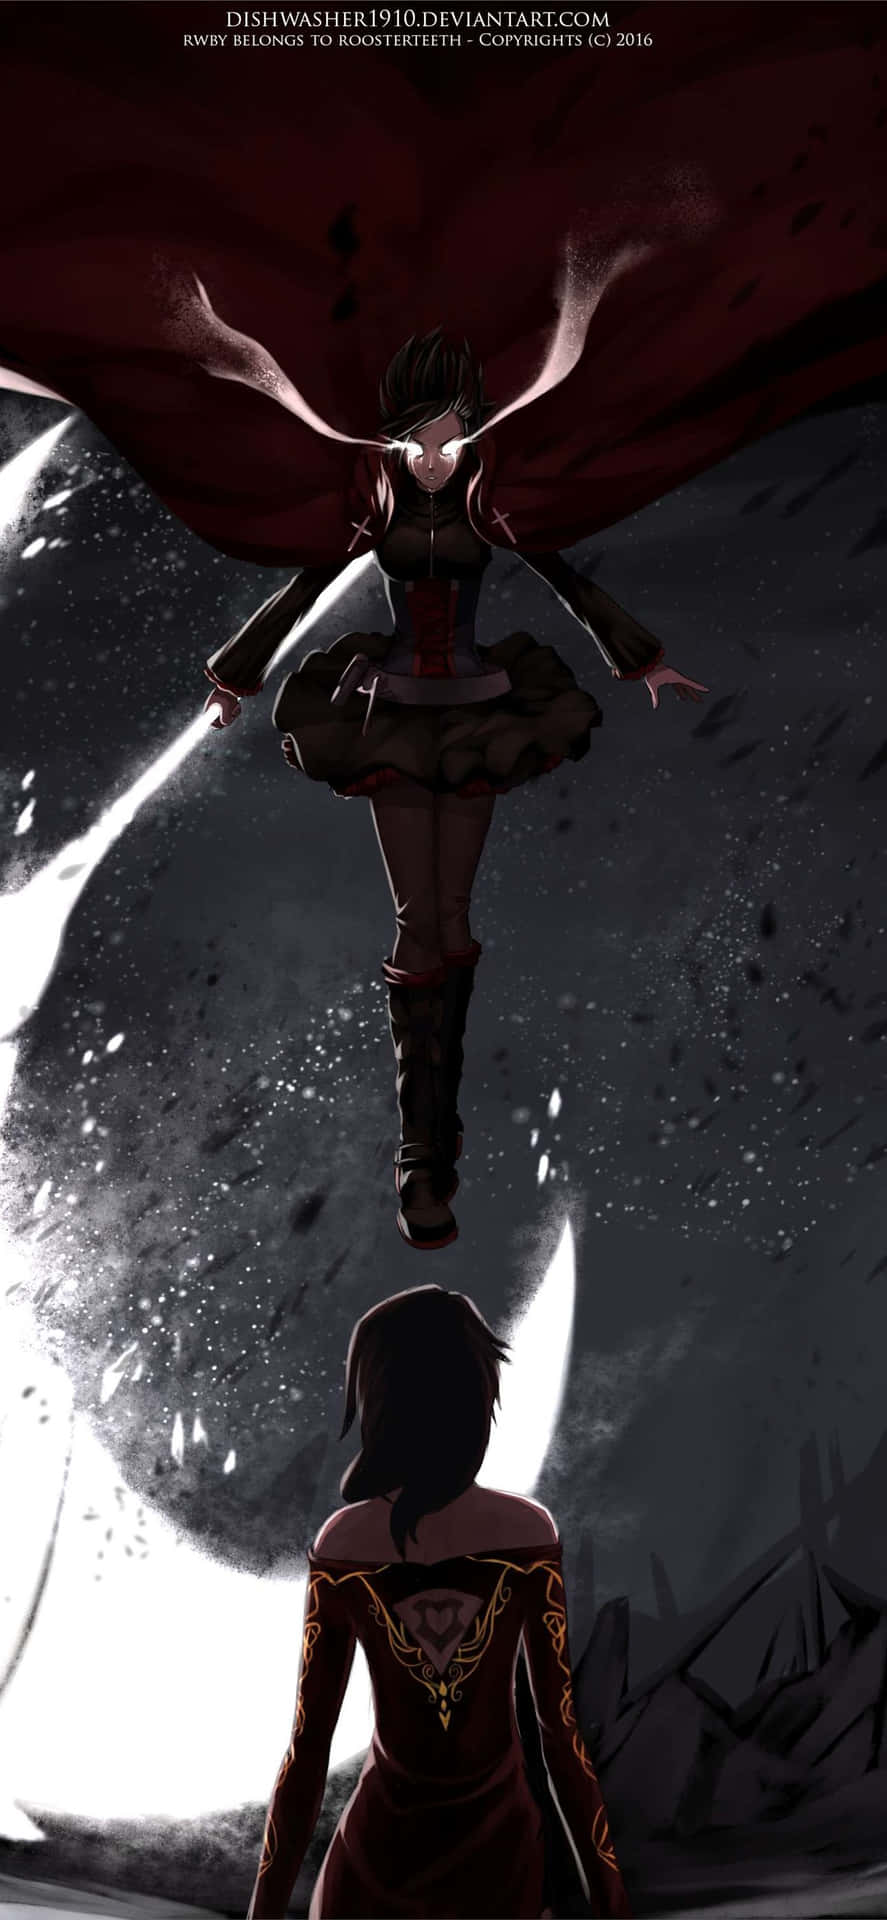 Join our heroines on their thrilling, superhero-like adventures in the online anime series RWBY